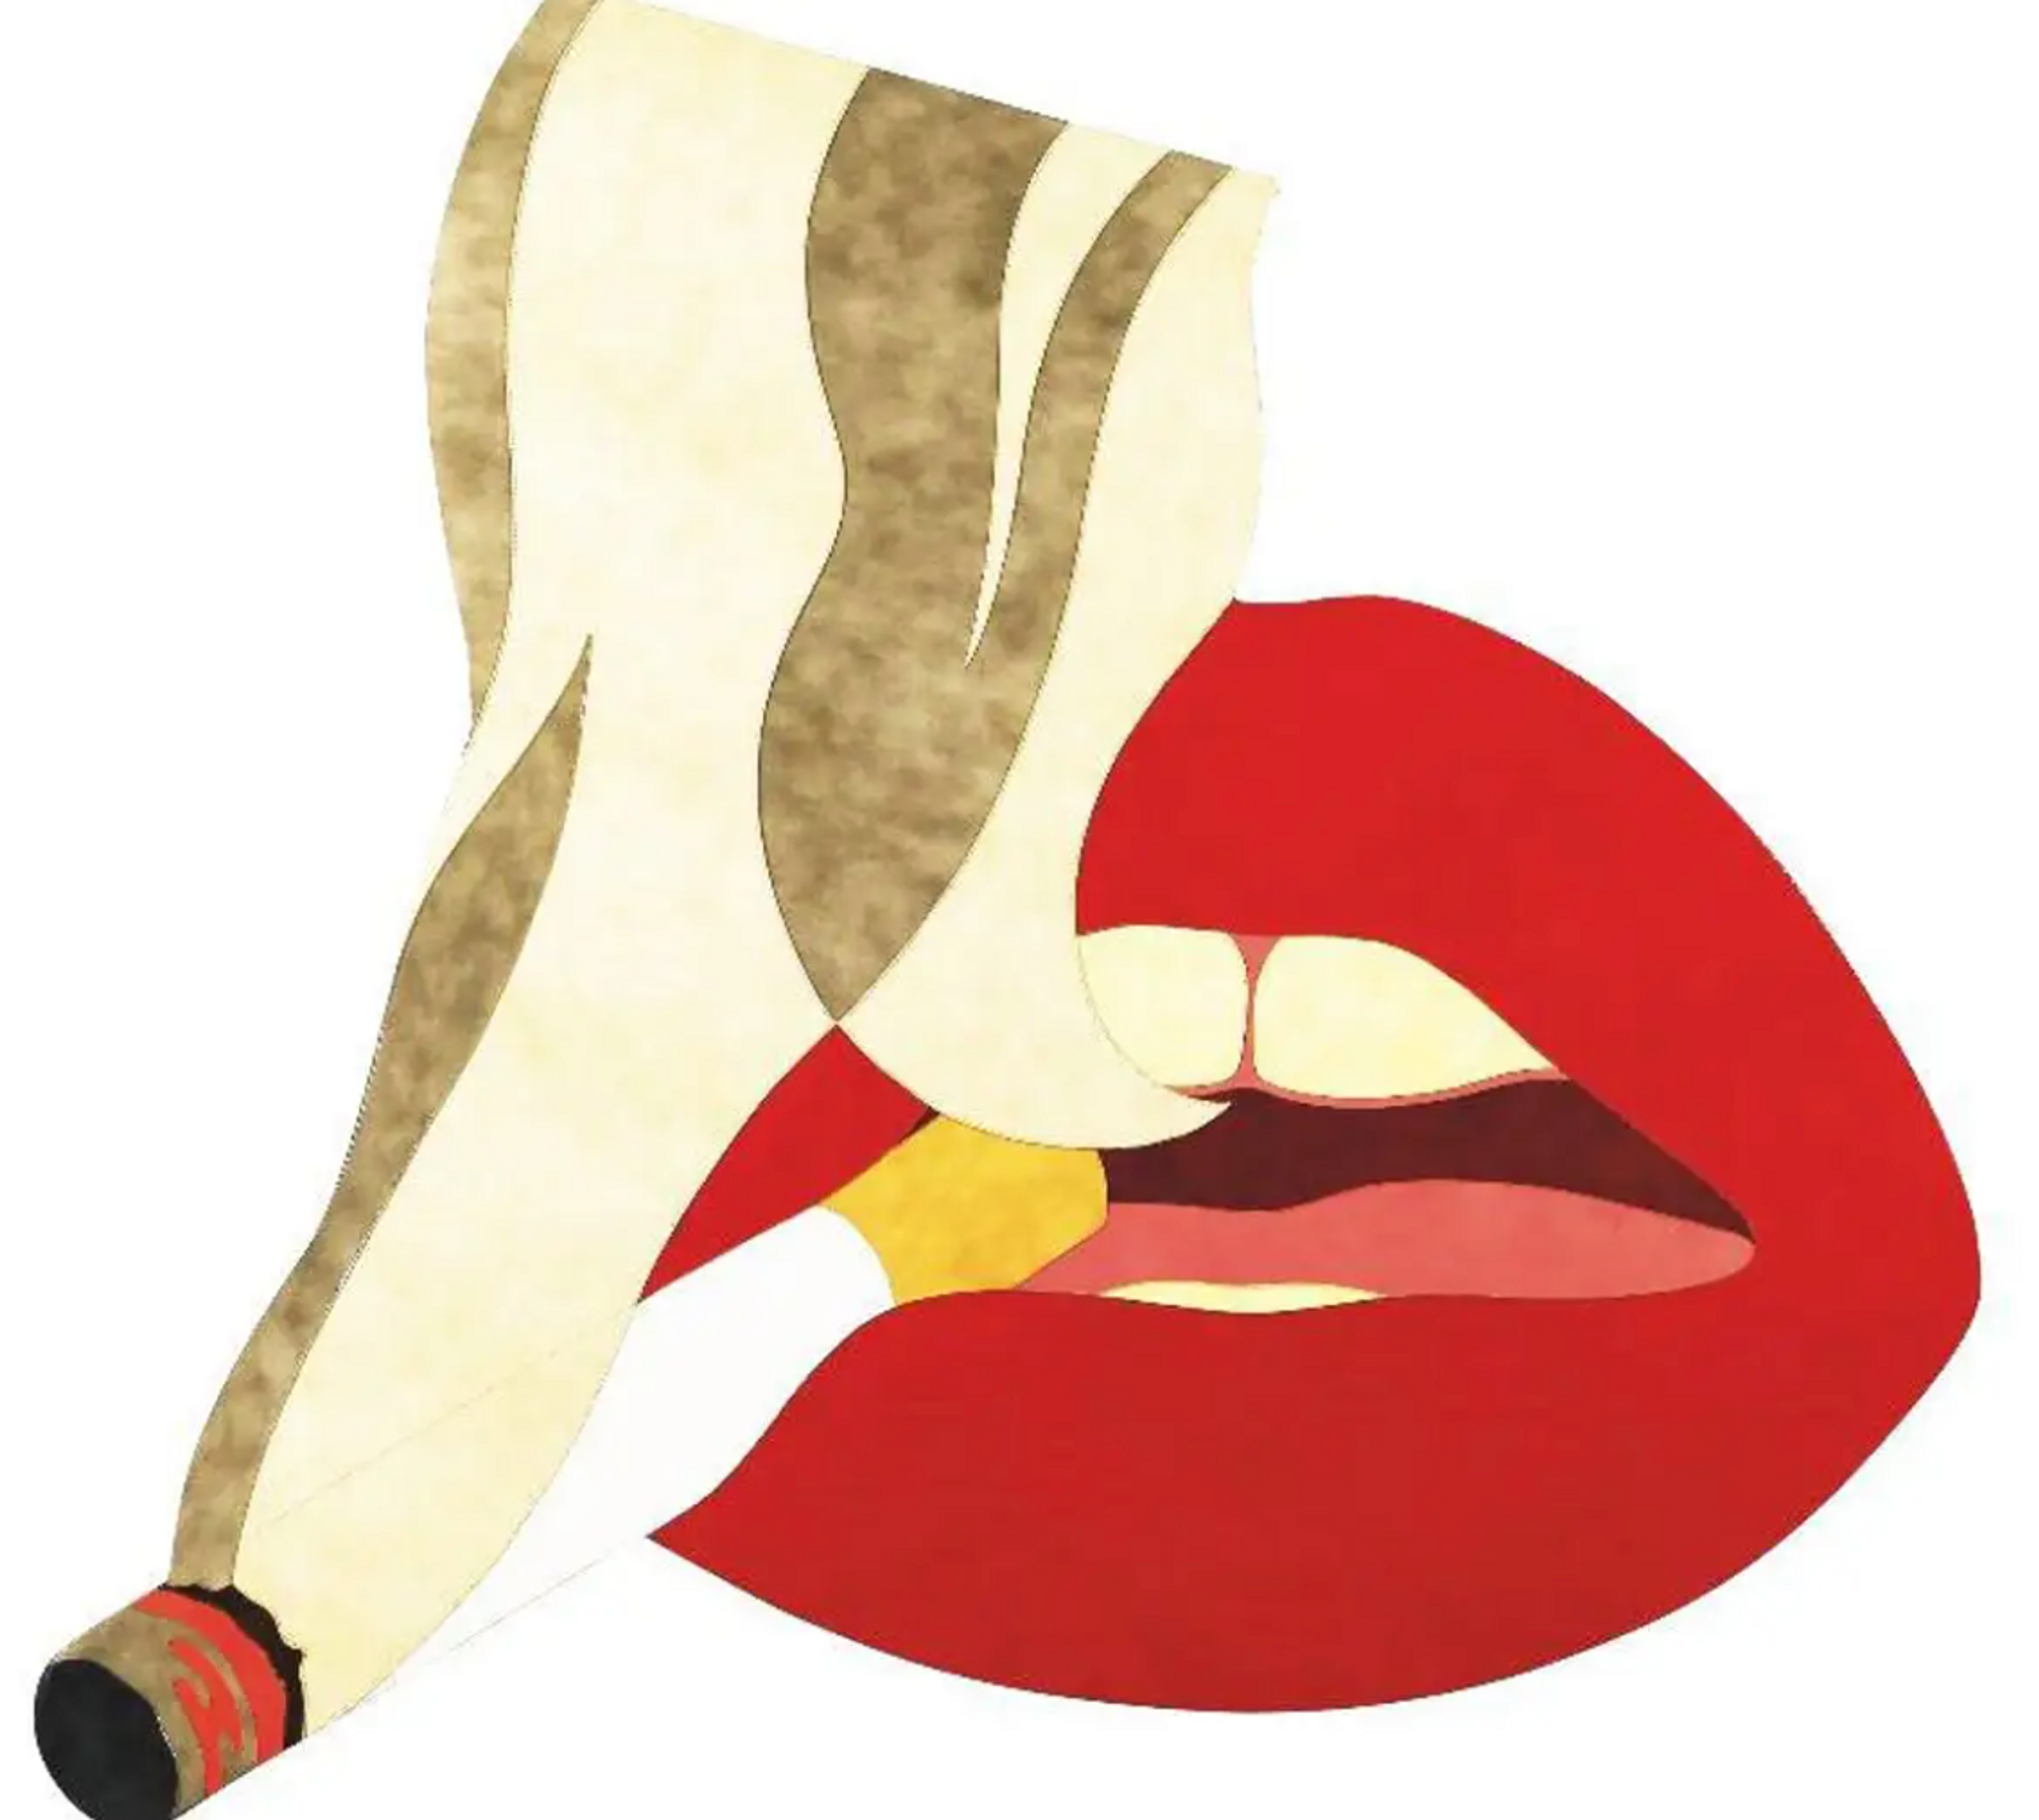 Under The Hammer: Top Prices Paid For Tom Wesselmann At Auction